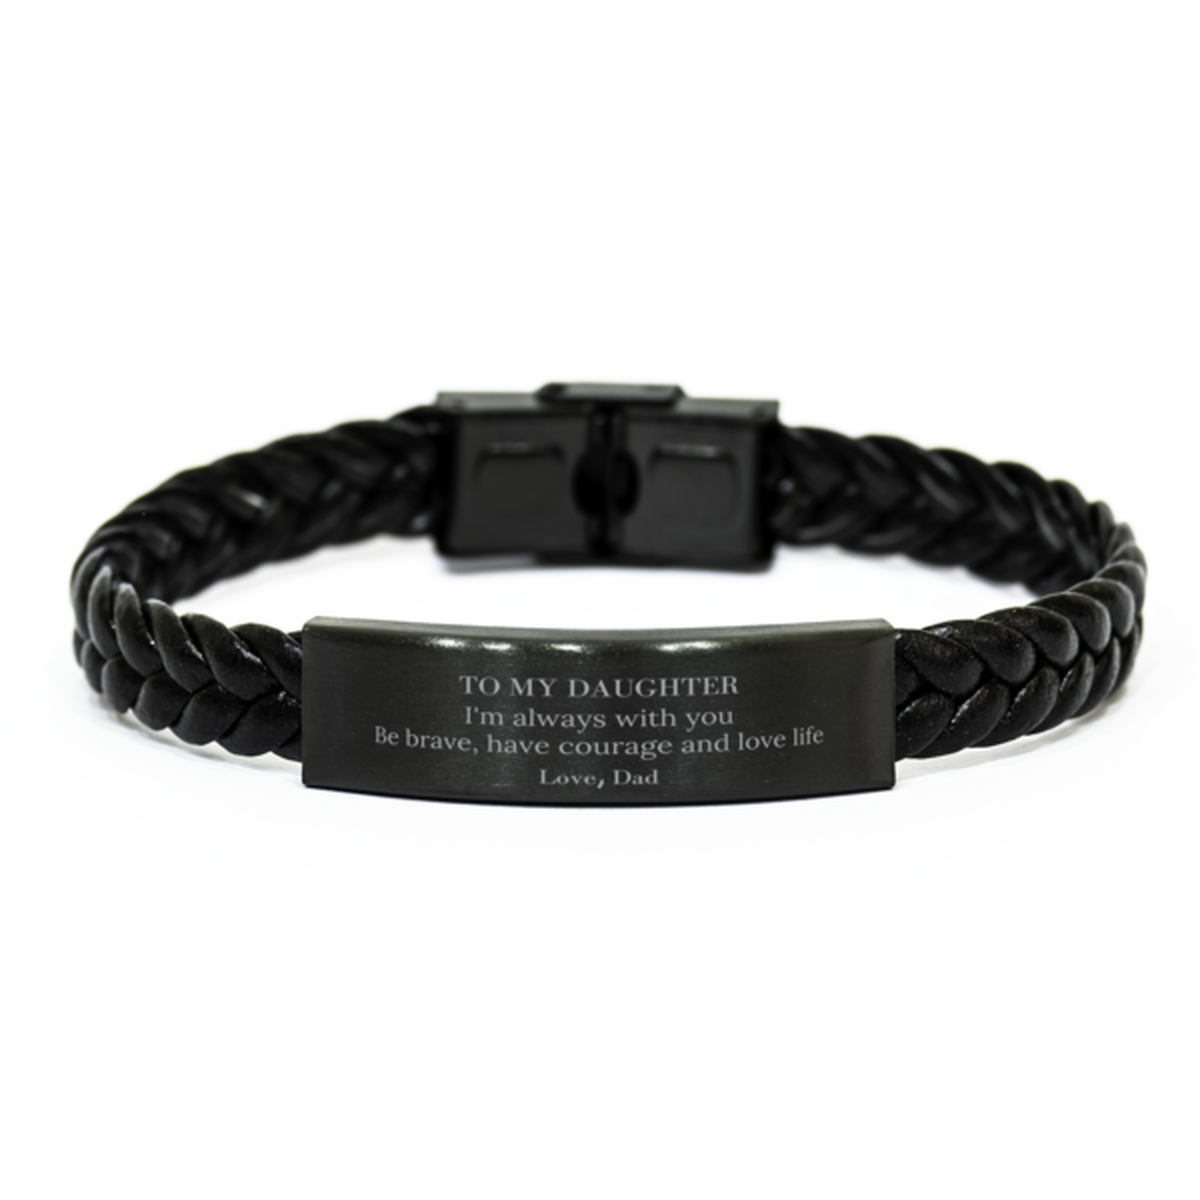 To My Daughter Gifts from Dad, Unique Braided Leather Bracelet Inspirational Christmas Birthday Graduation Gifts for Daughter I'm always with you. Be brave, have courage and love life. Love, Dad